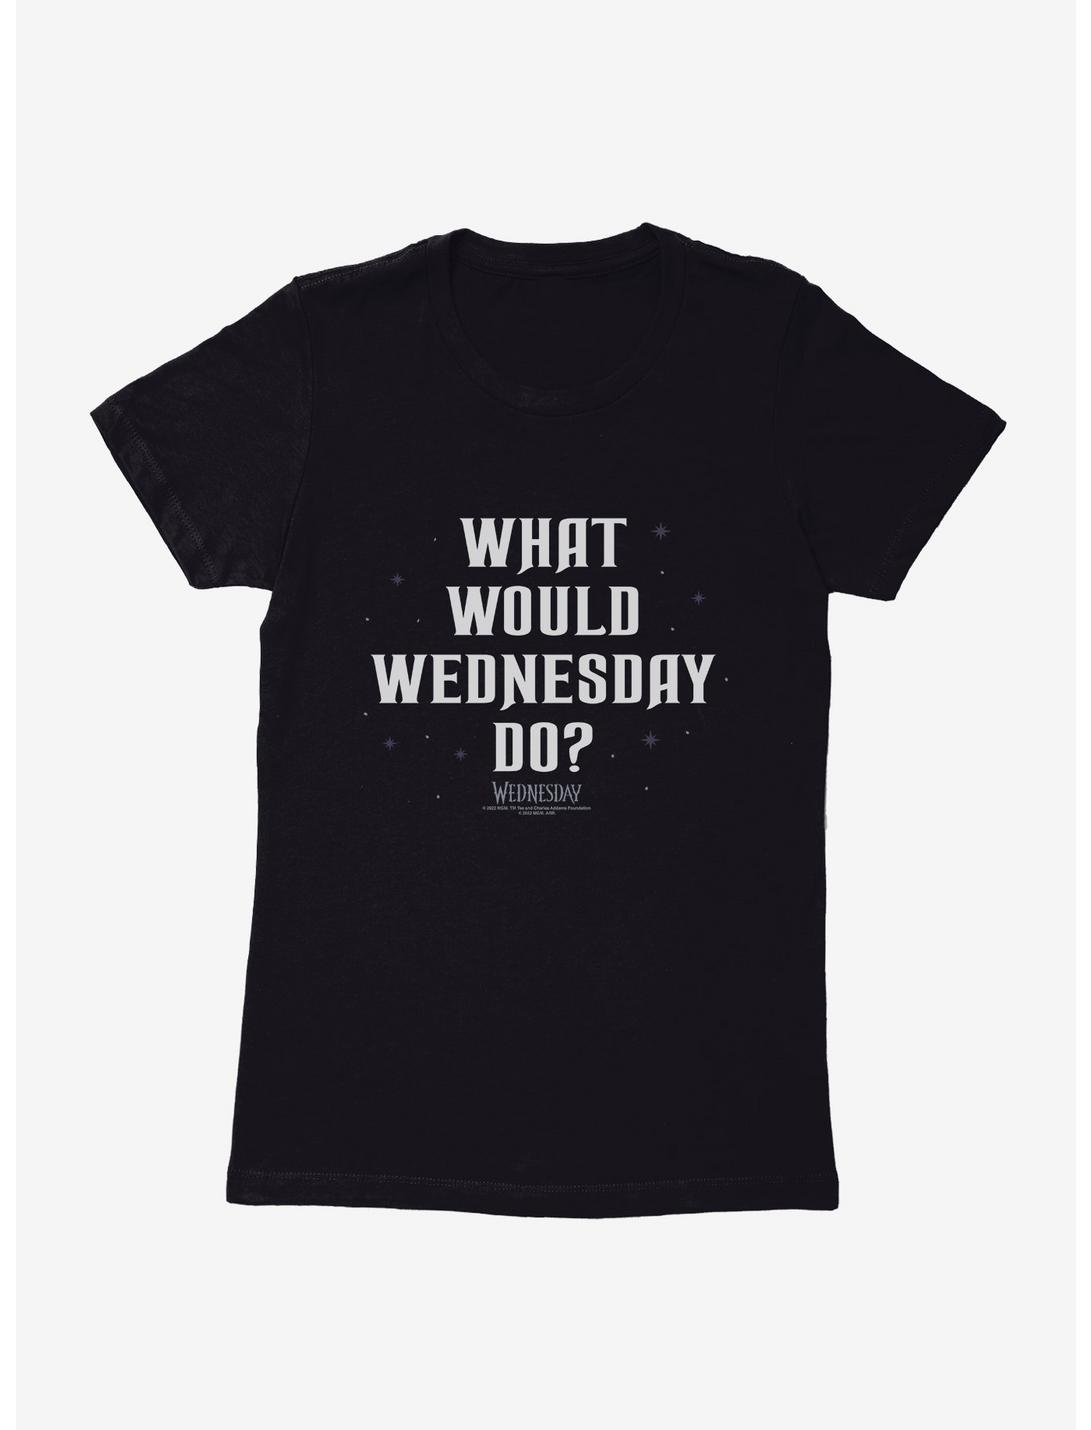 Wednesday What Would Wednesday Do? Womens T-Shirt, BLACK, hi-res